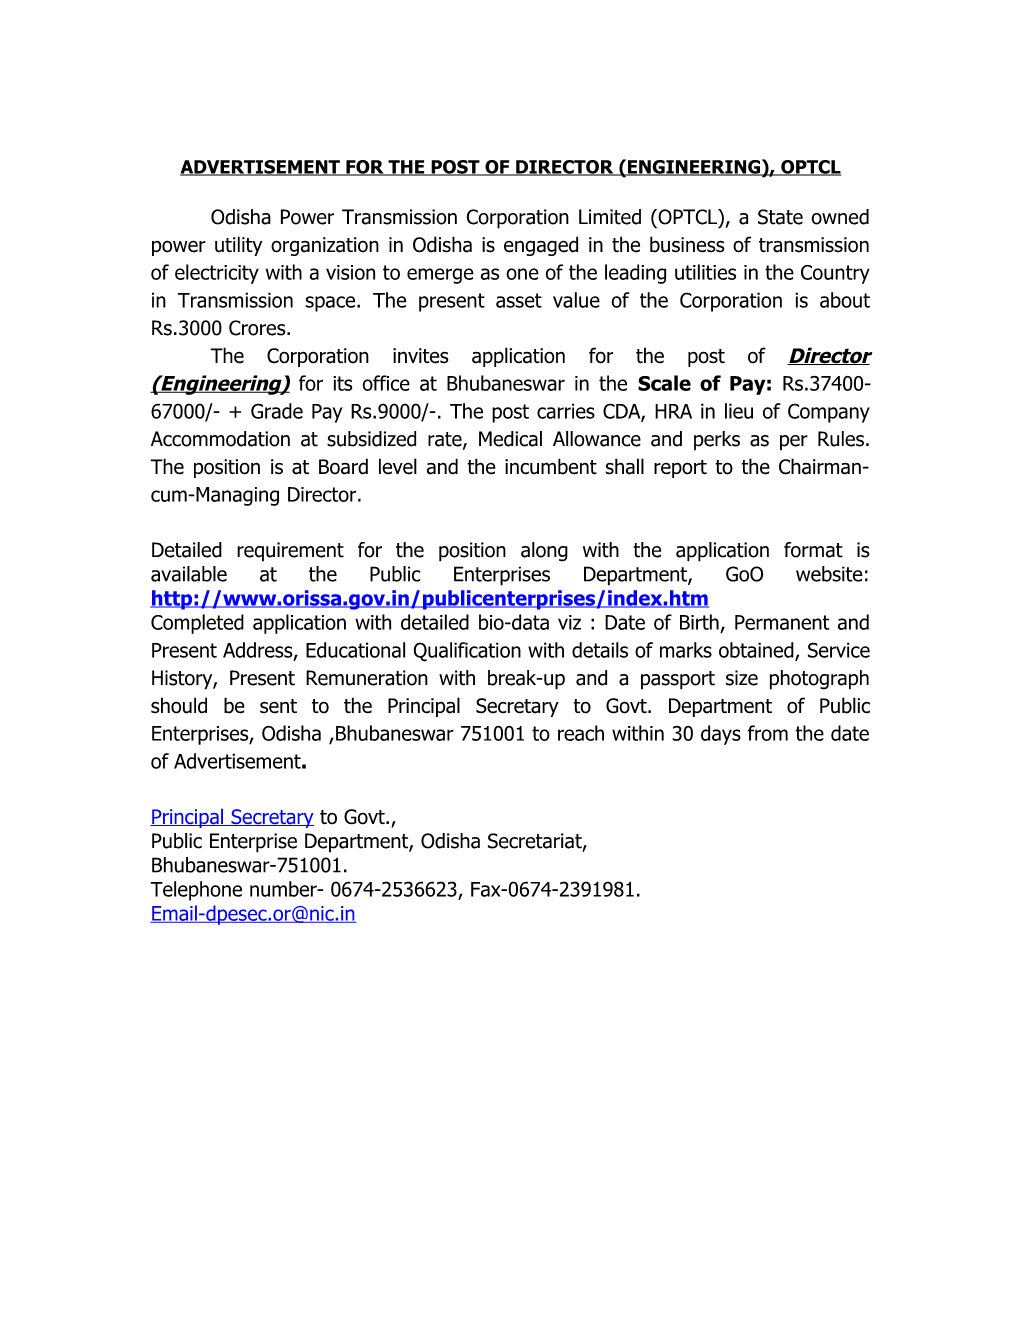 Advertisement for the Post of Director (Engineering), Optcl